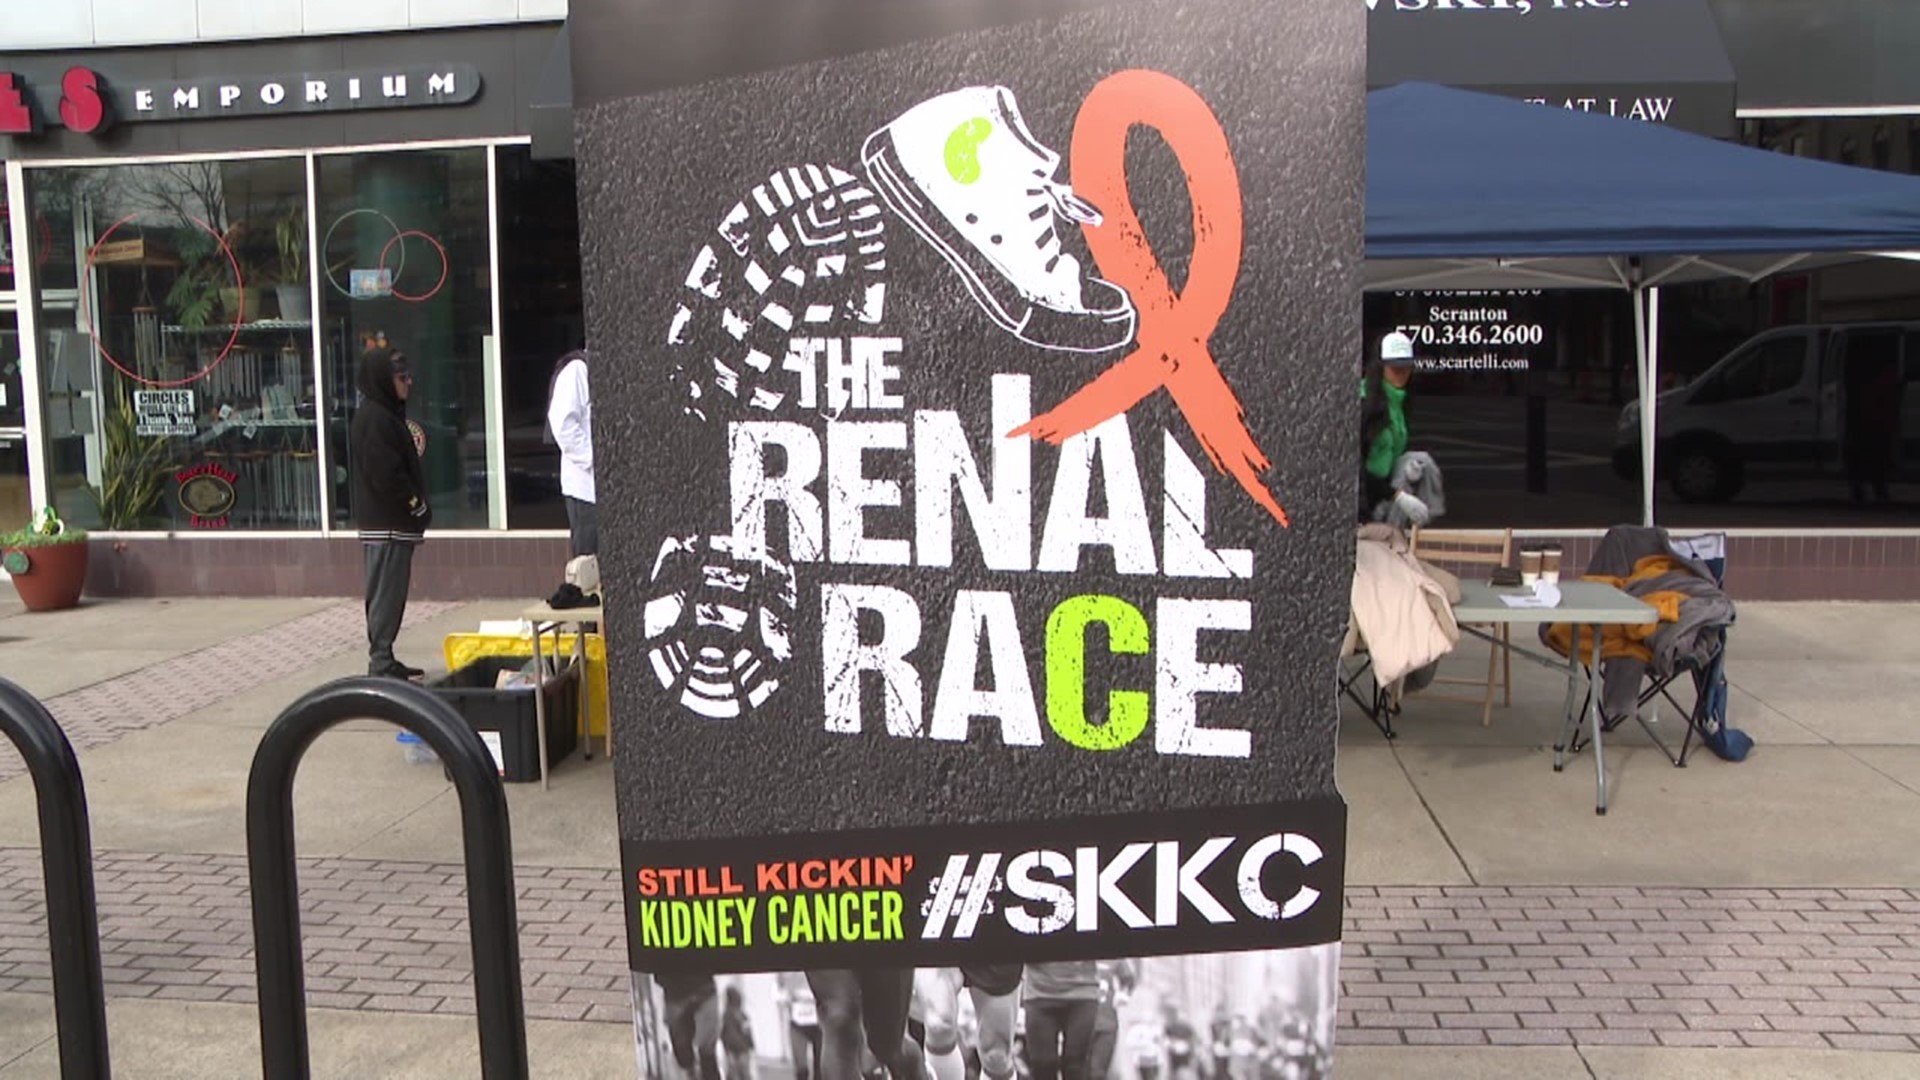 Organizers say they are glad to be back after three years, and they want to spread the word about kidney cancer.